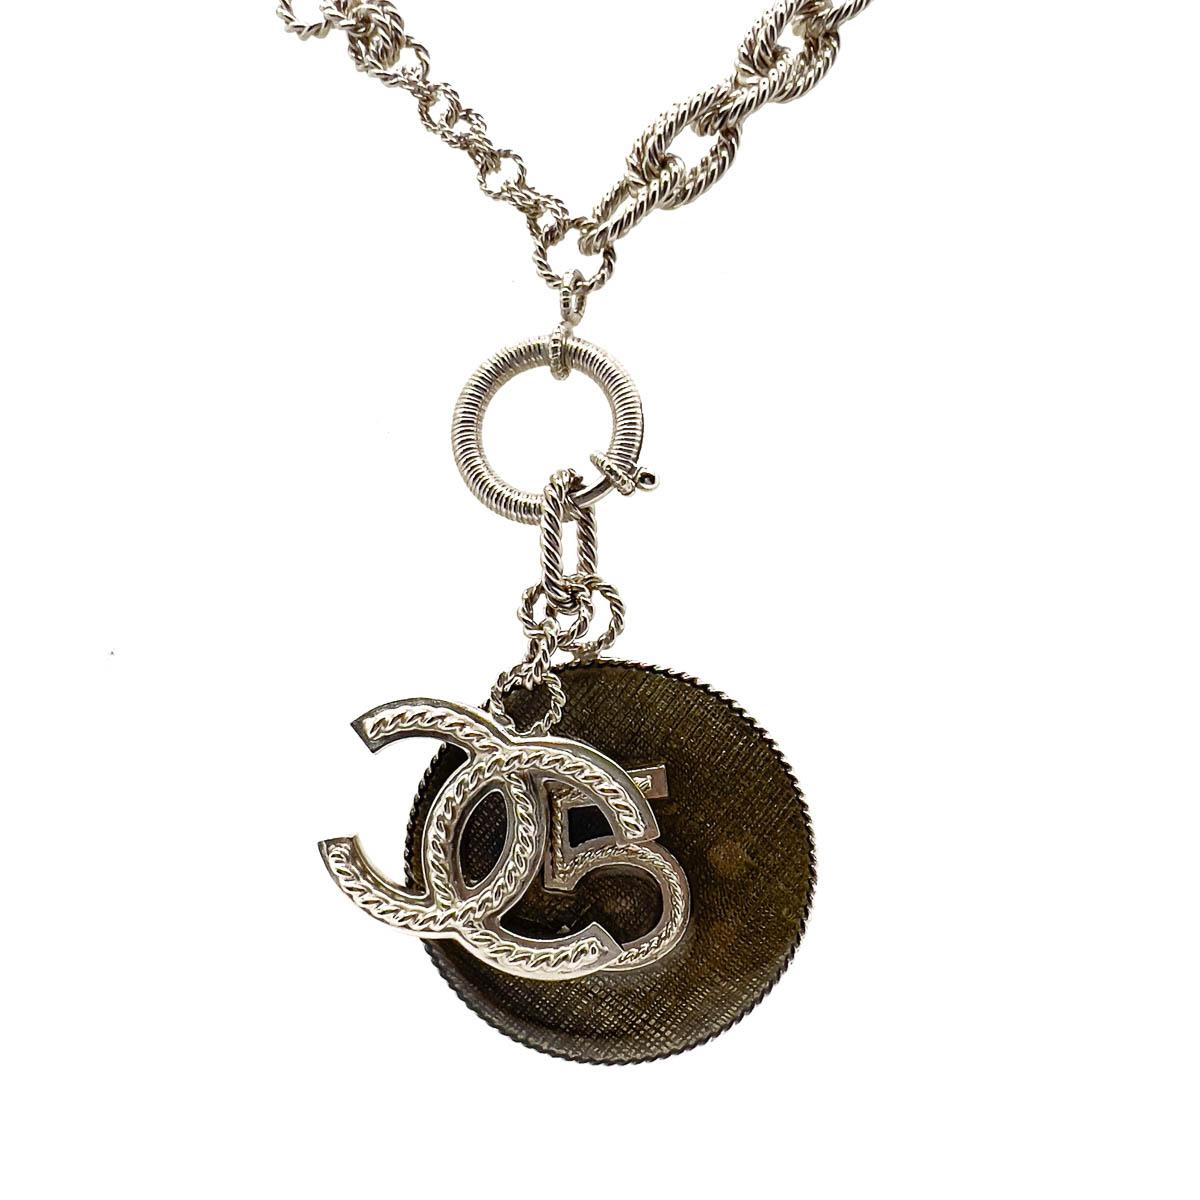 Vintage Chanel Statement No. 5 Rope Chain Charm Necklace 2013 In Good Condition For Sale In Wilmslow, GB